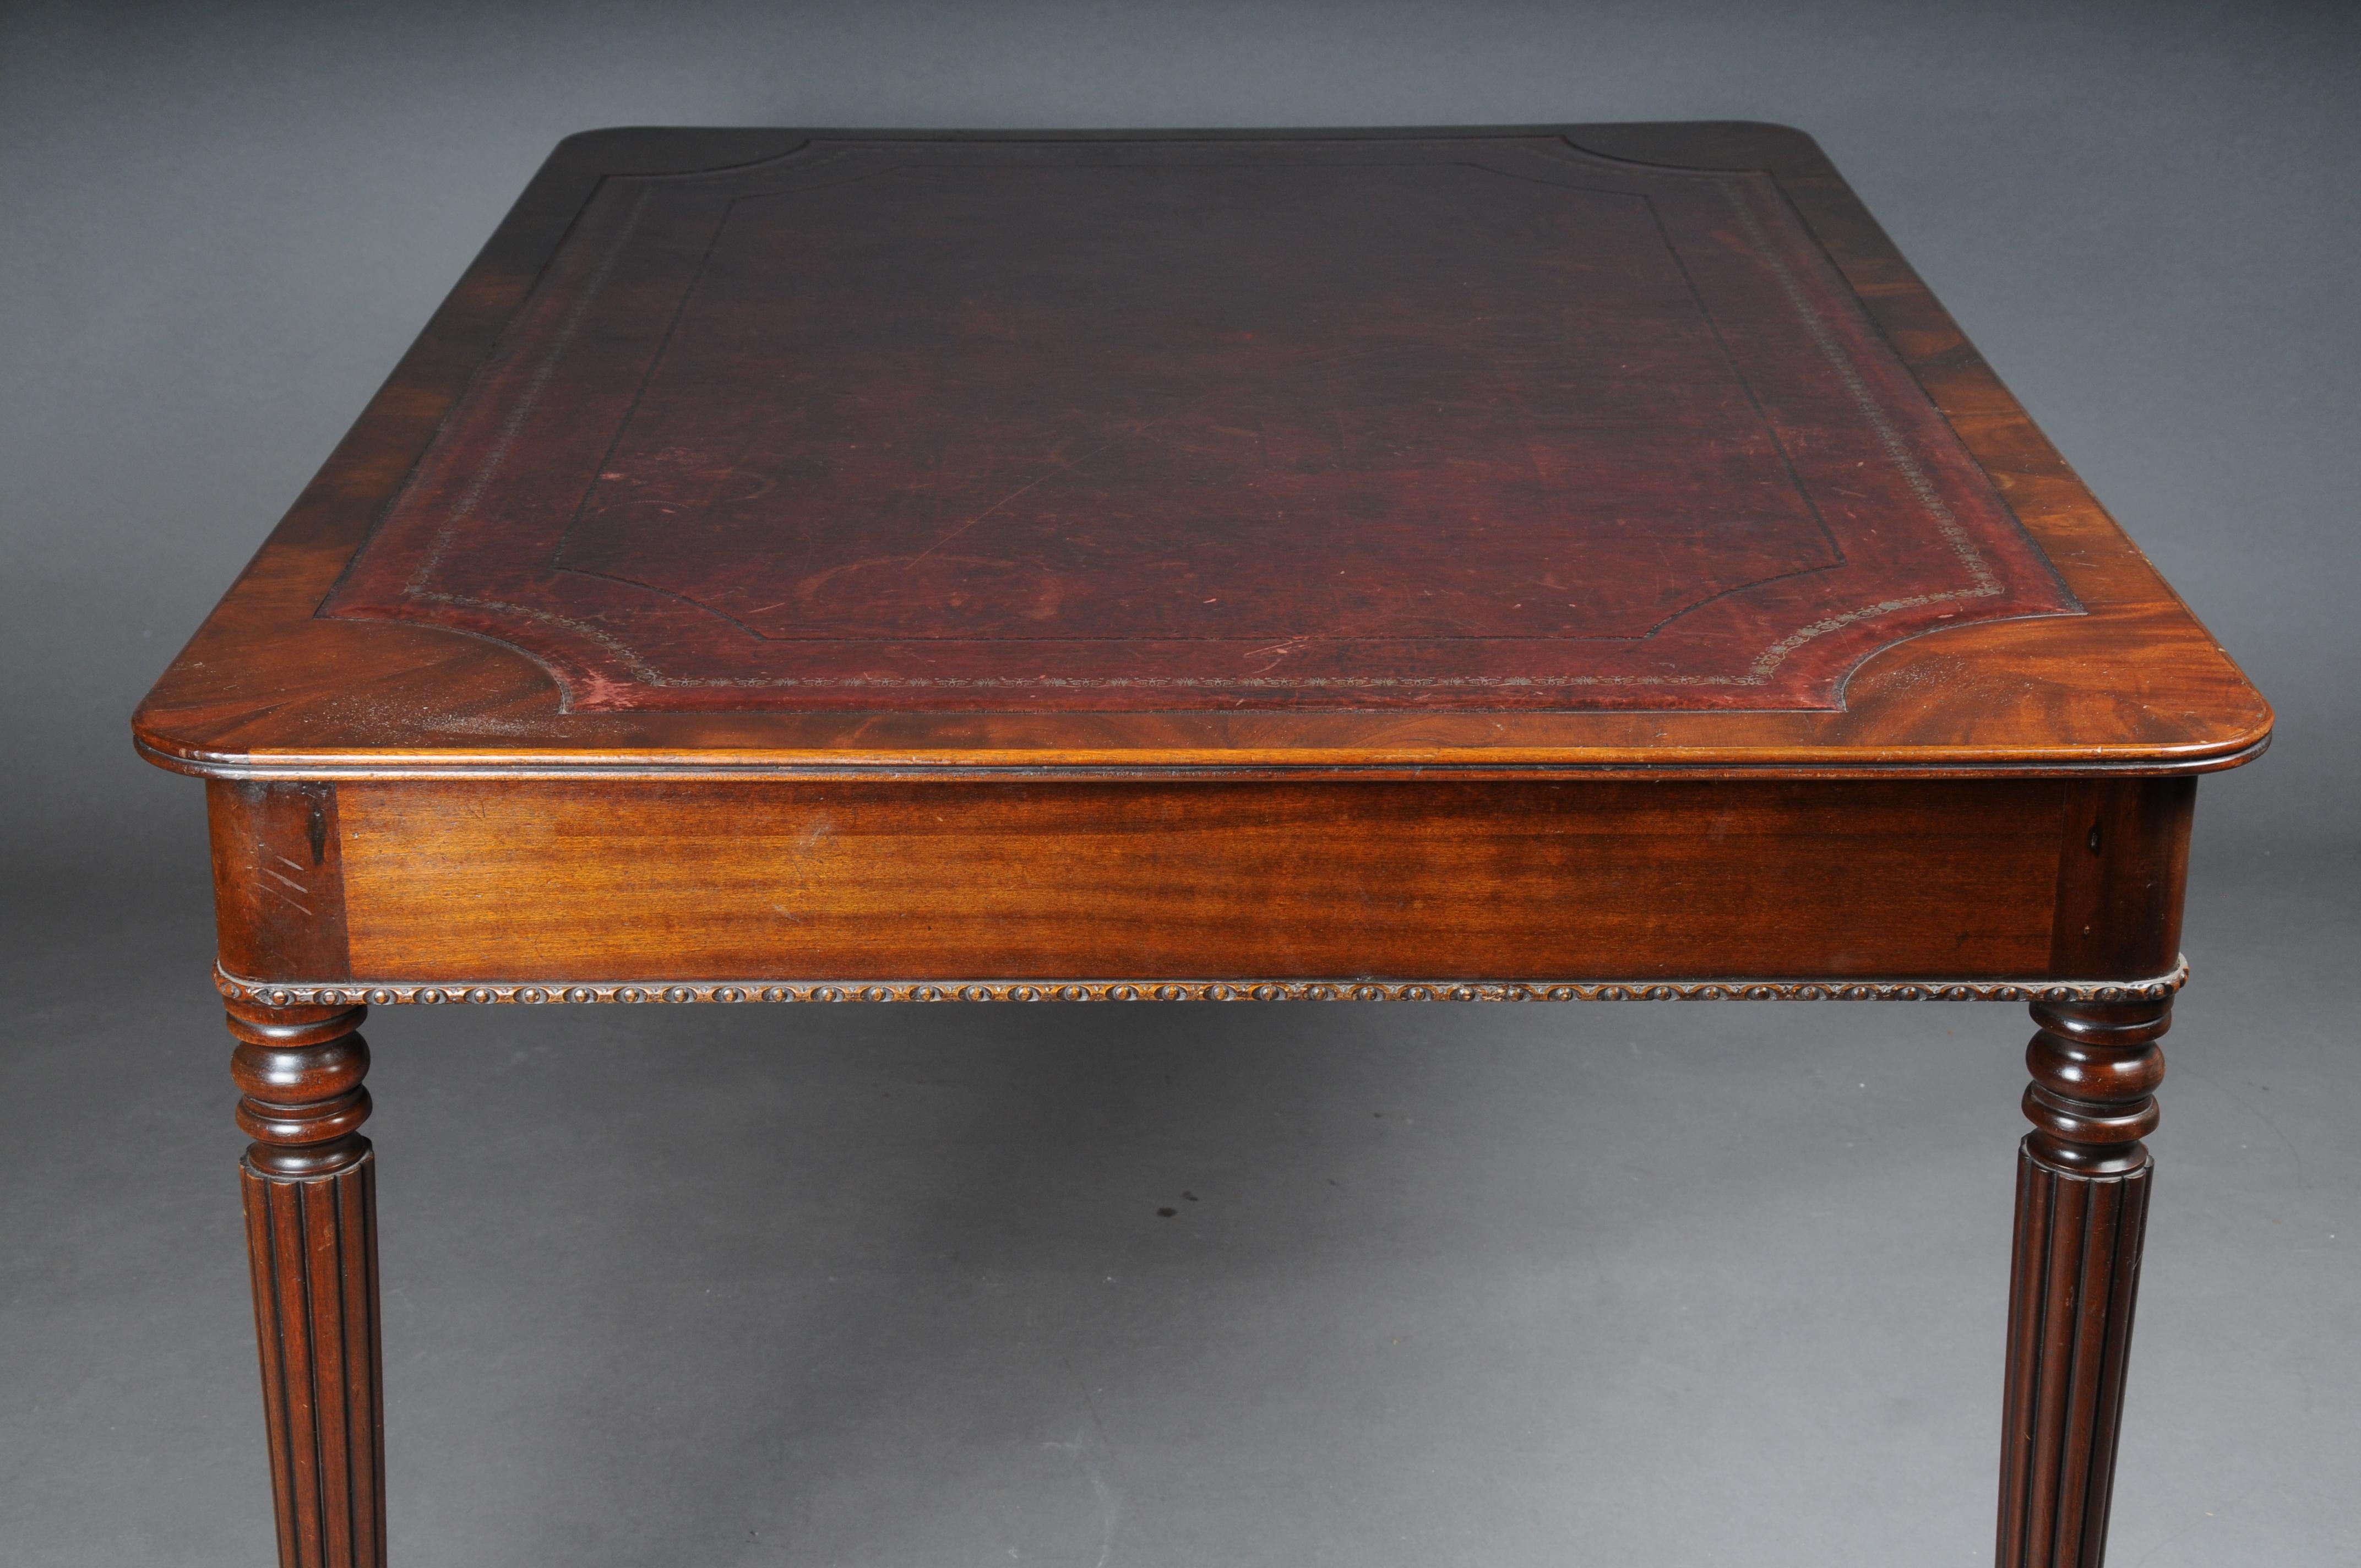 Large Victorian Partner Desk, England, 19th Century, Mahogany with Leather For Sale 4